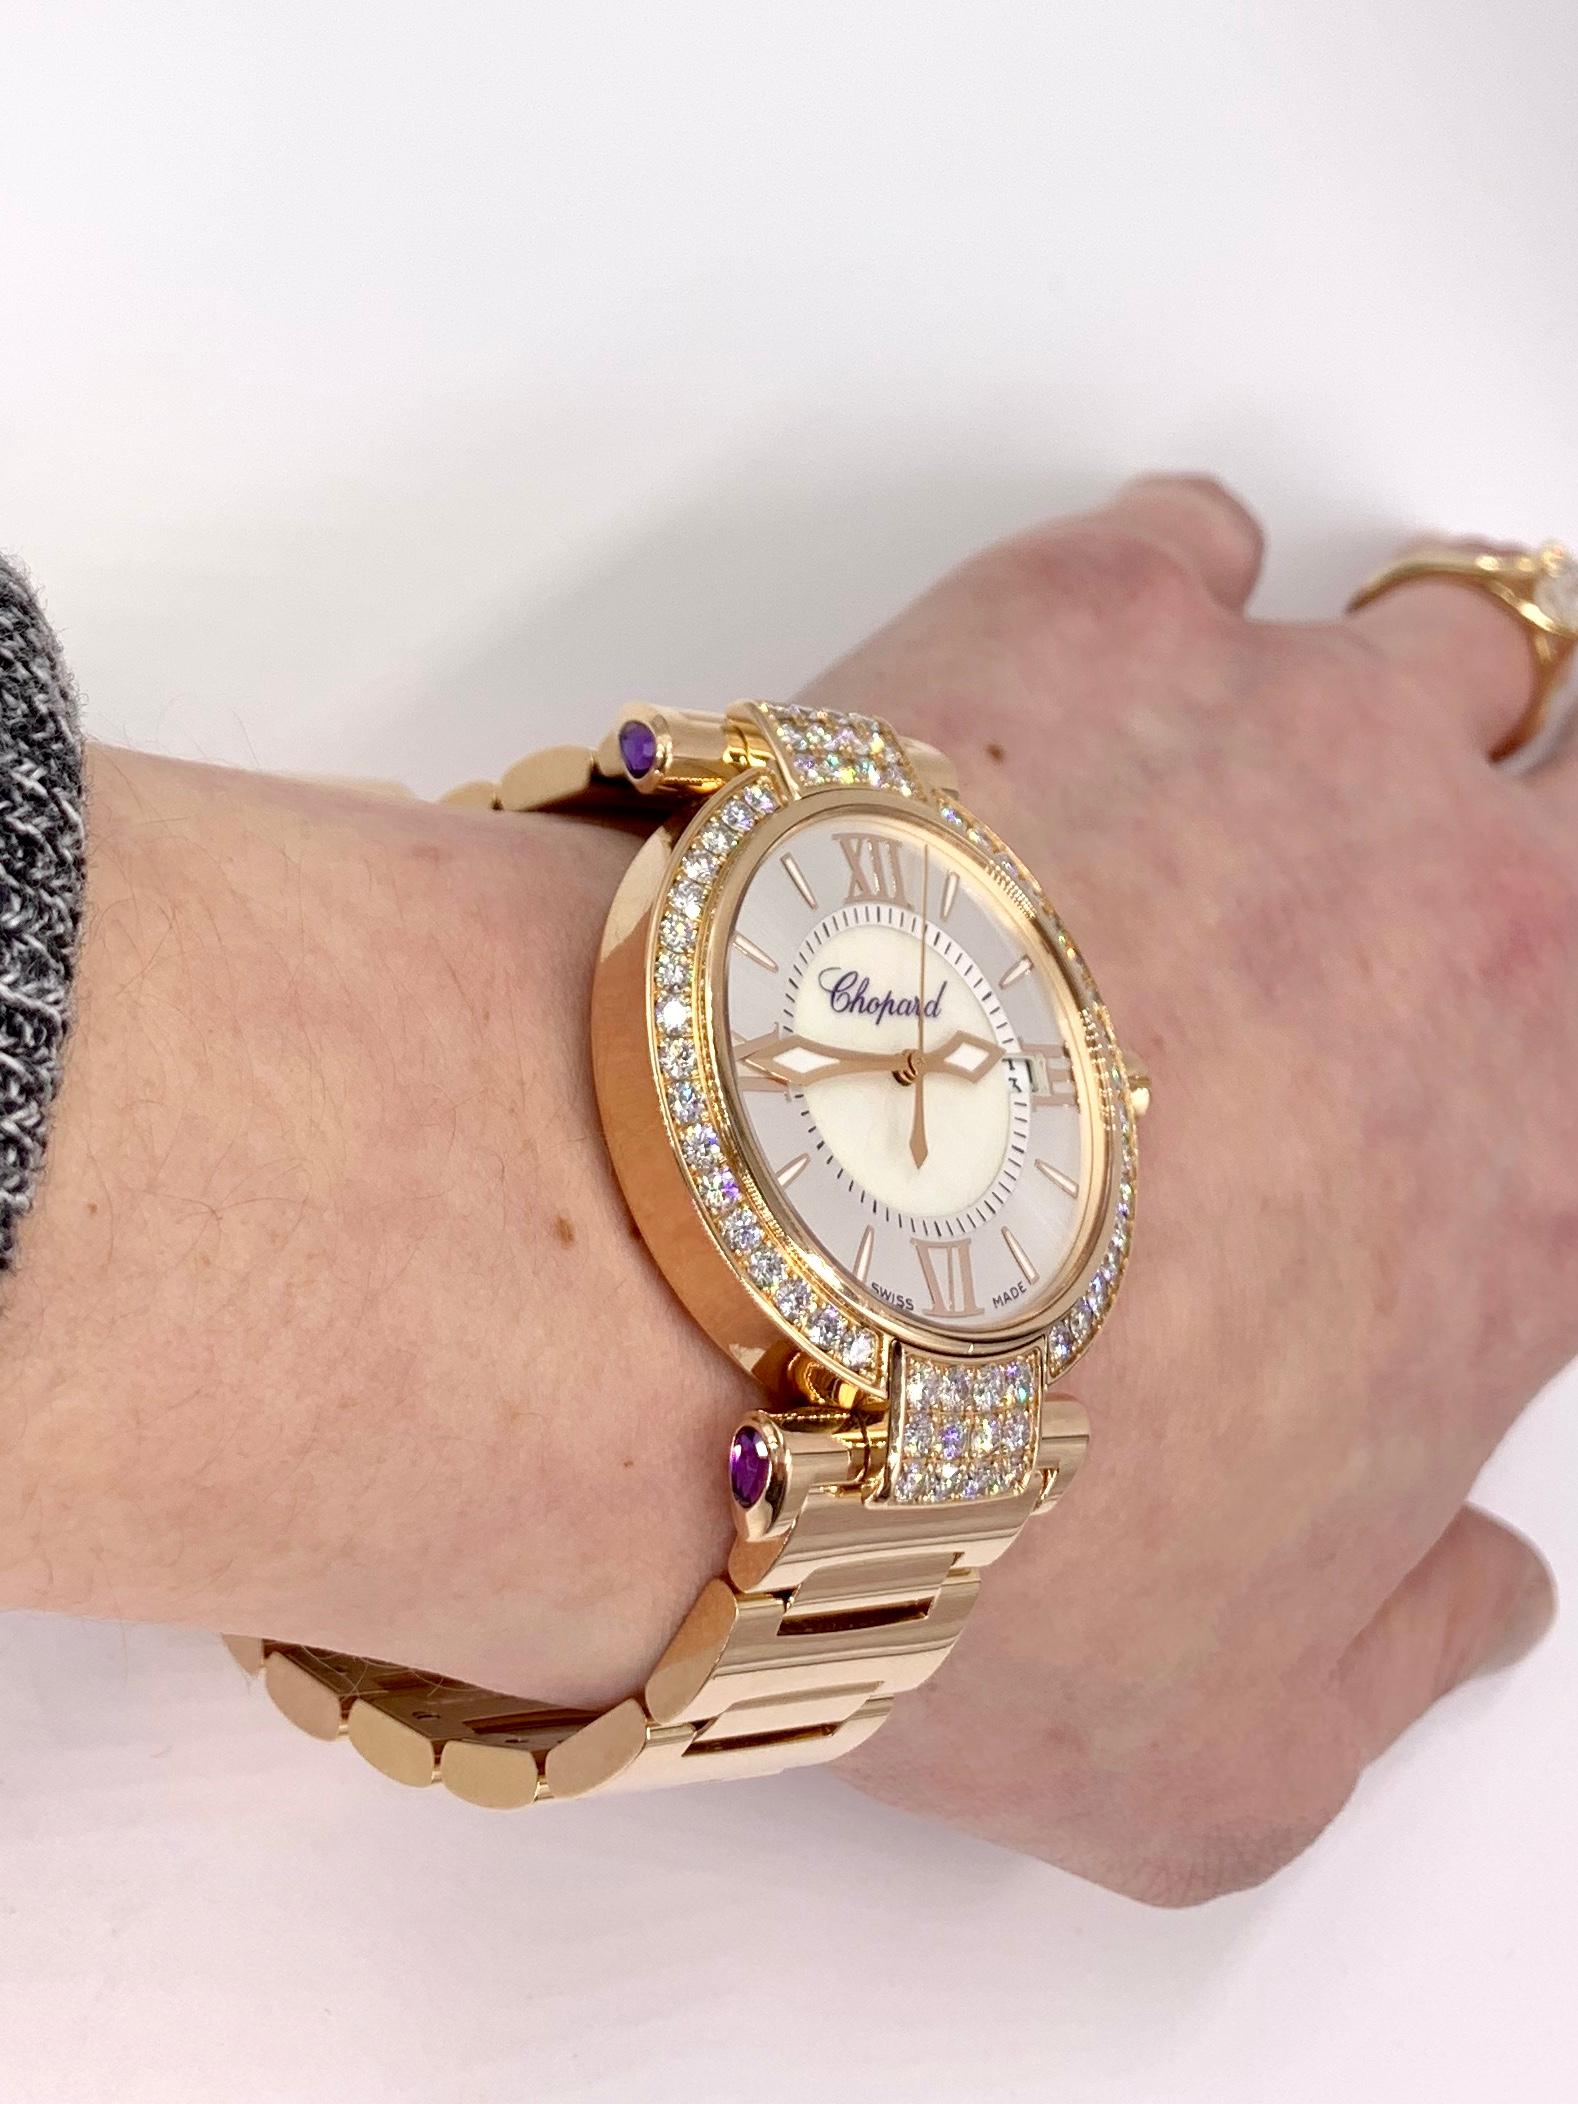 Chopard 18 Karat Rose Gold and Diamond Imperiale Watch For Sale 8